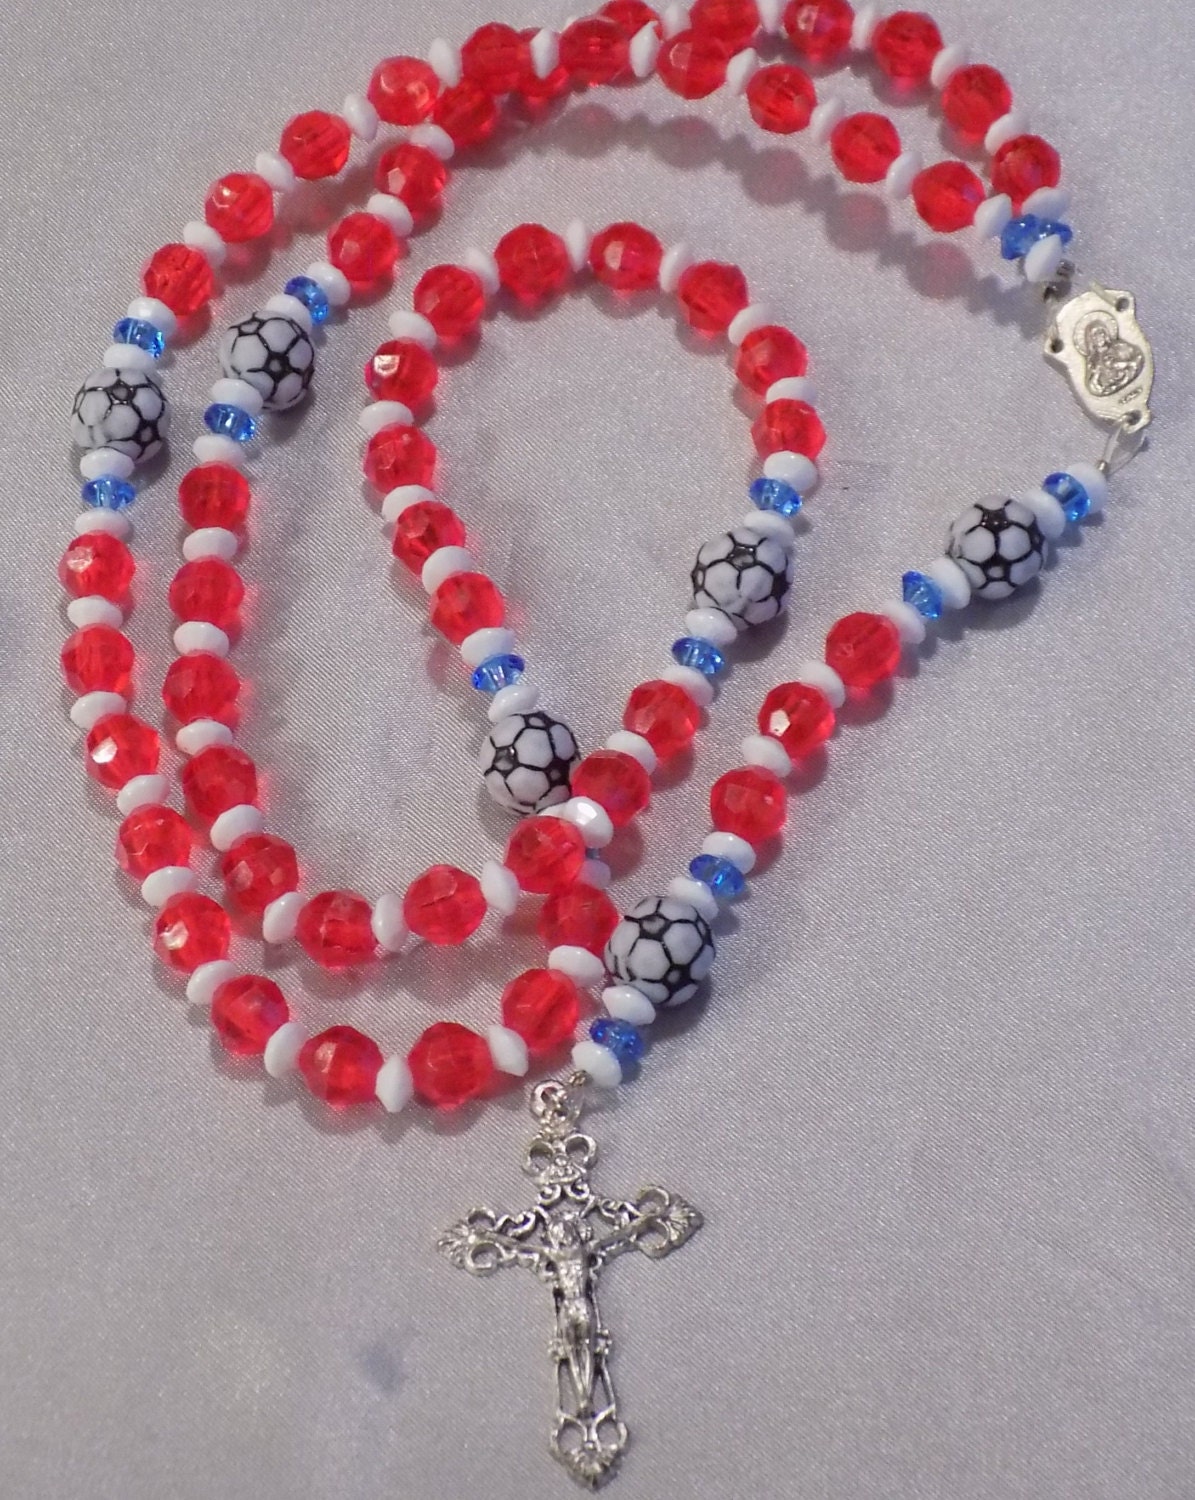 Soccer Sports Rosaries - Yellow and Black - White and Black - White and  Blue - Red, White and Blue - Pink and White - Soccer Team Colors